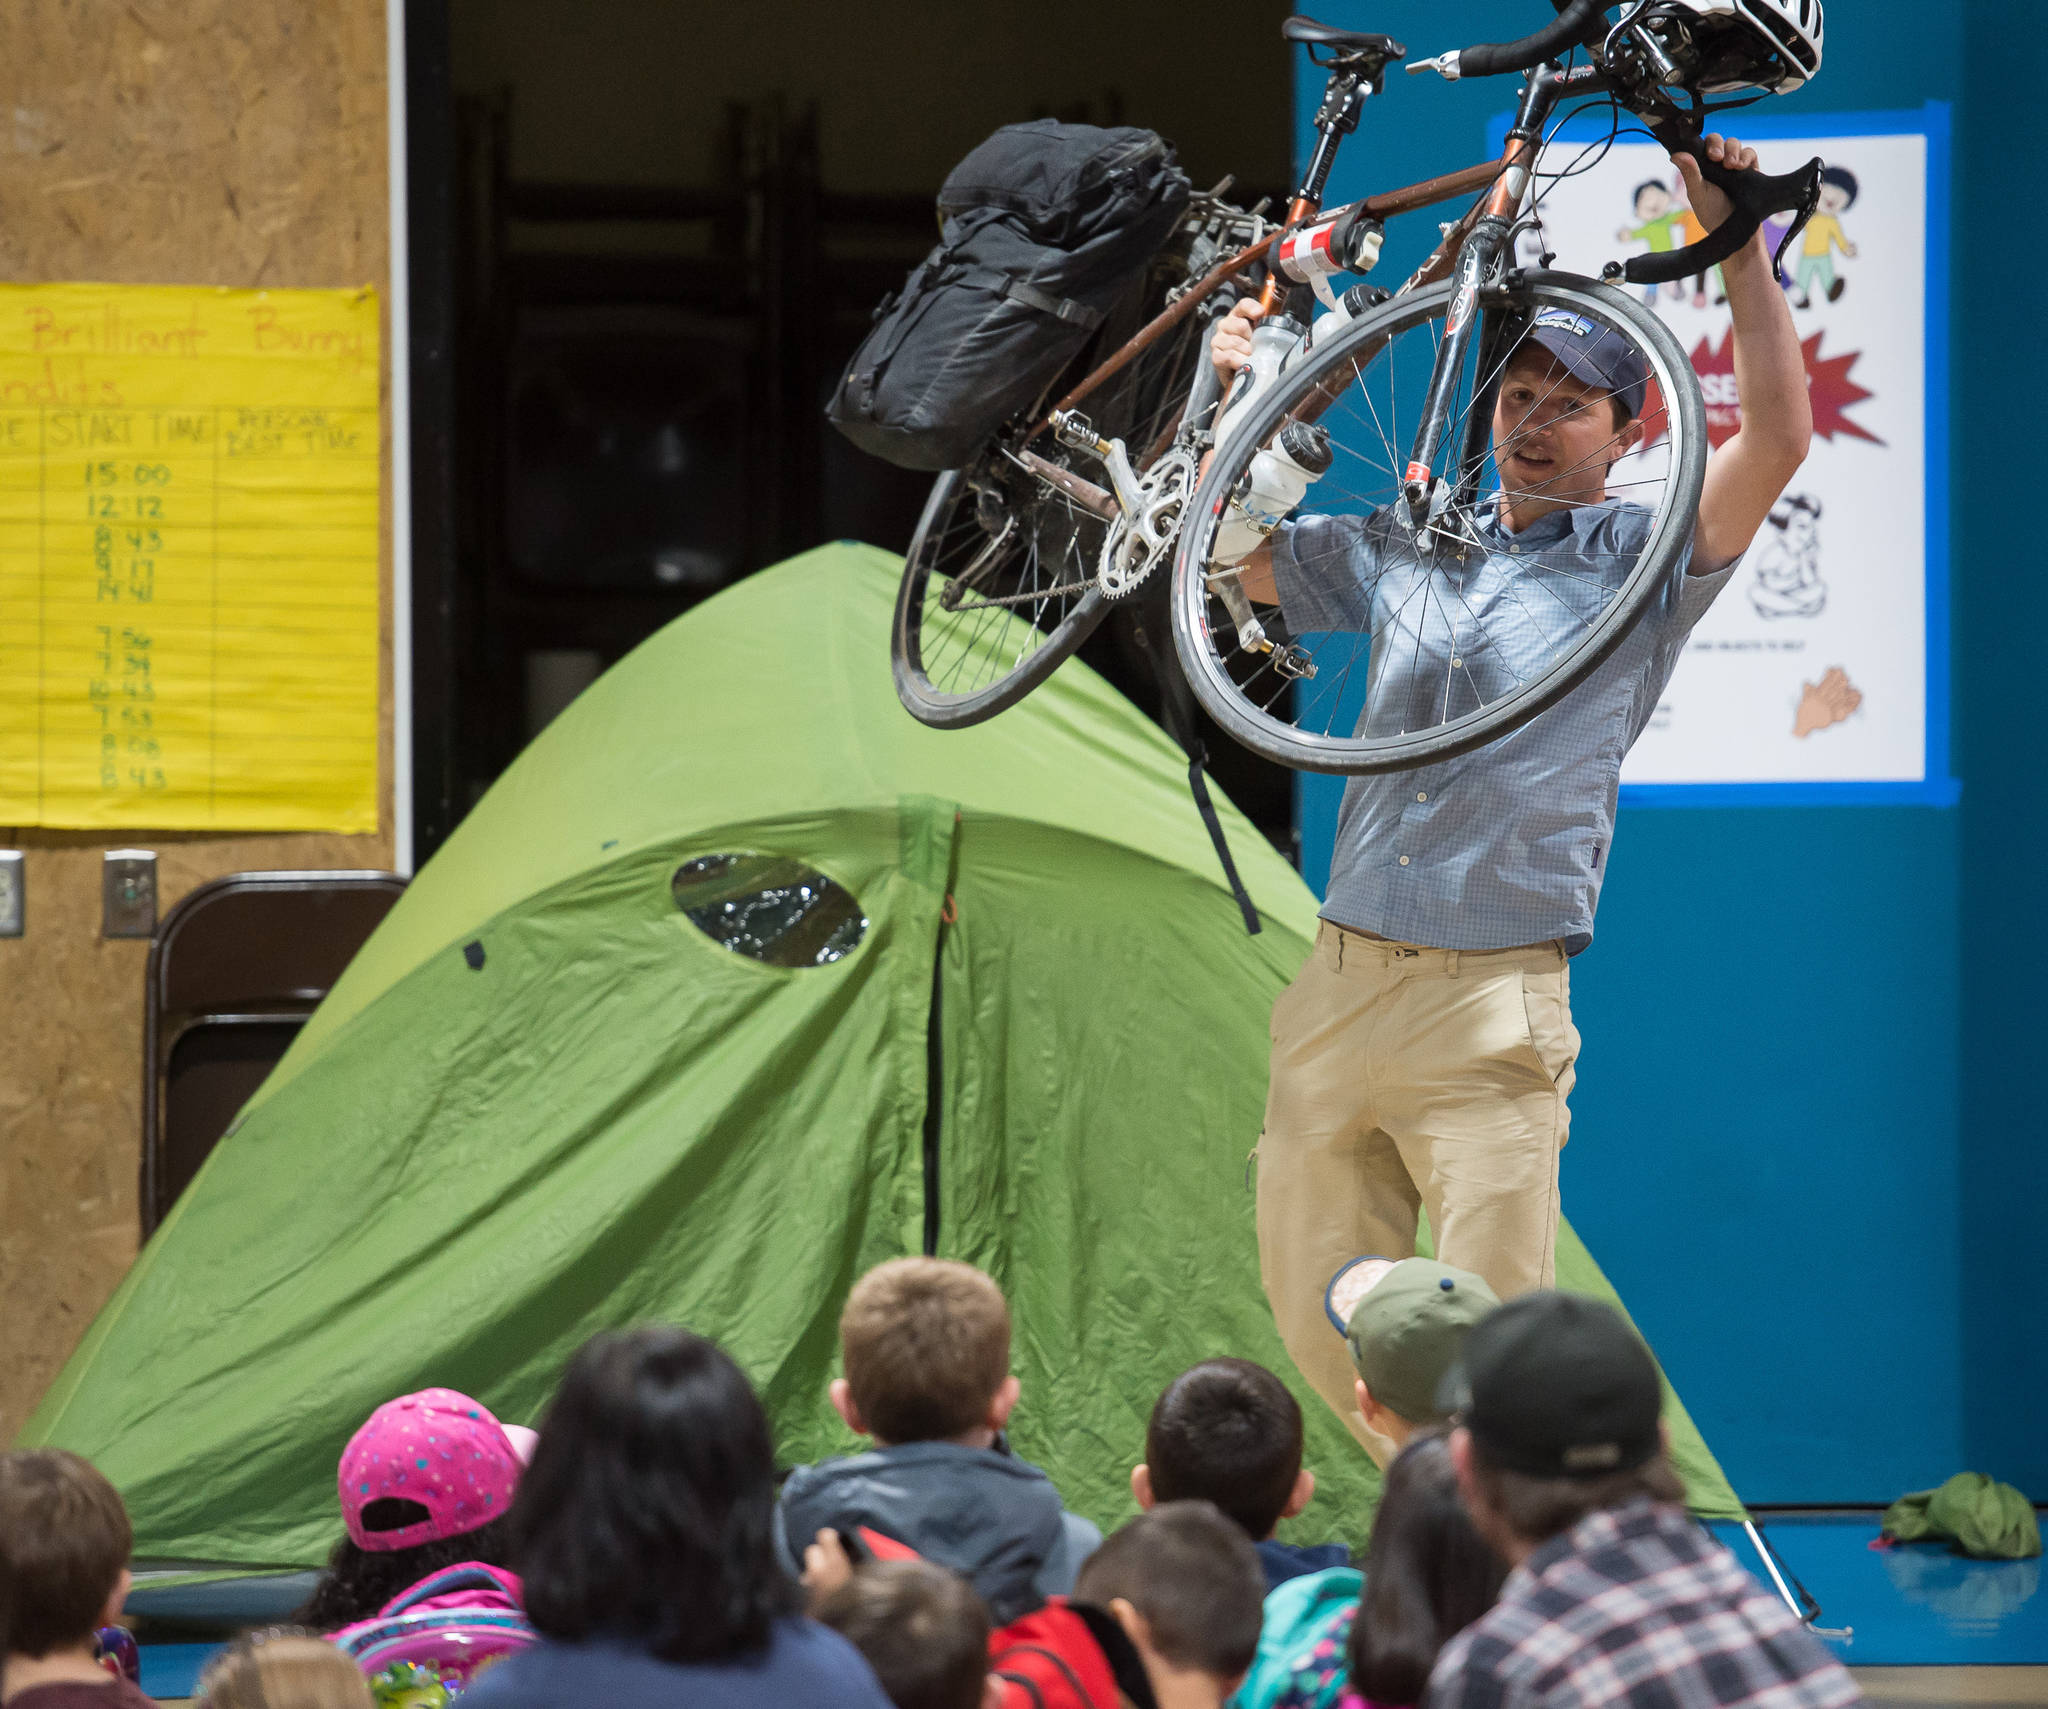 Chris Figureida shows off his touring bicycle and lightweight camping gear during a school assembly at Mendenhall River Community School on Friday, Sept. 15, 2017. (Michael Penn | Juneau Empire)